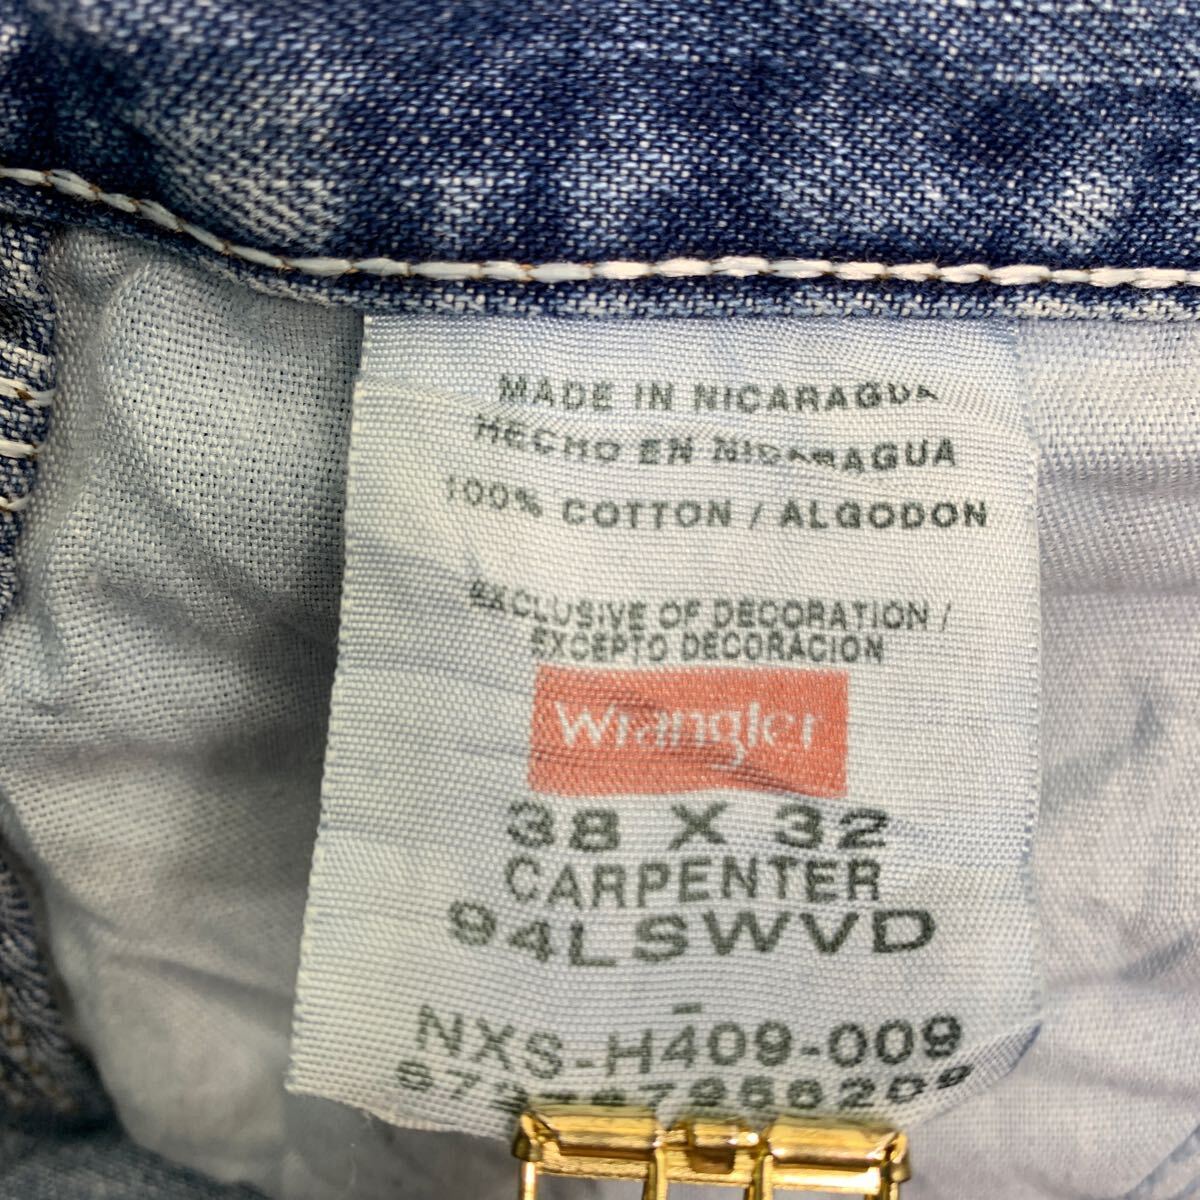 Wrangler Denim painter's pants W38 Wrangler big size blue cotton old clothes . America buying up 2403-995